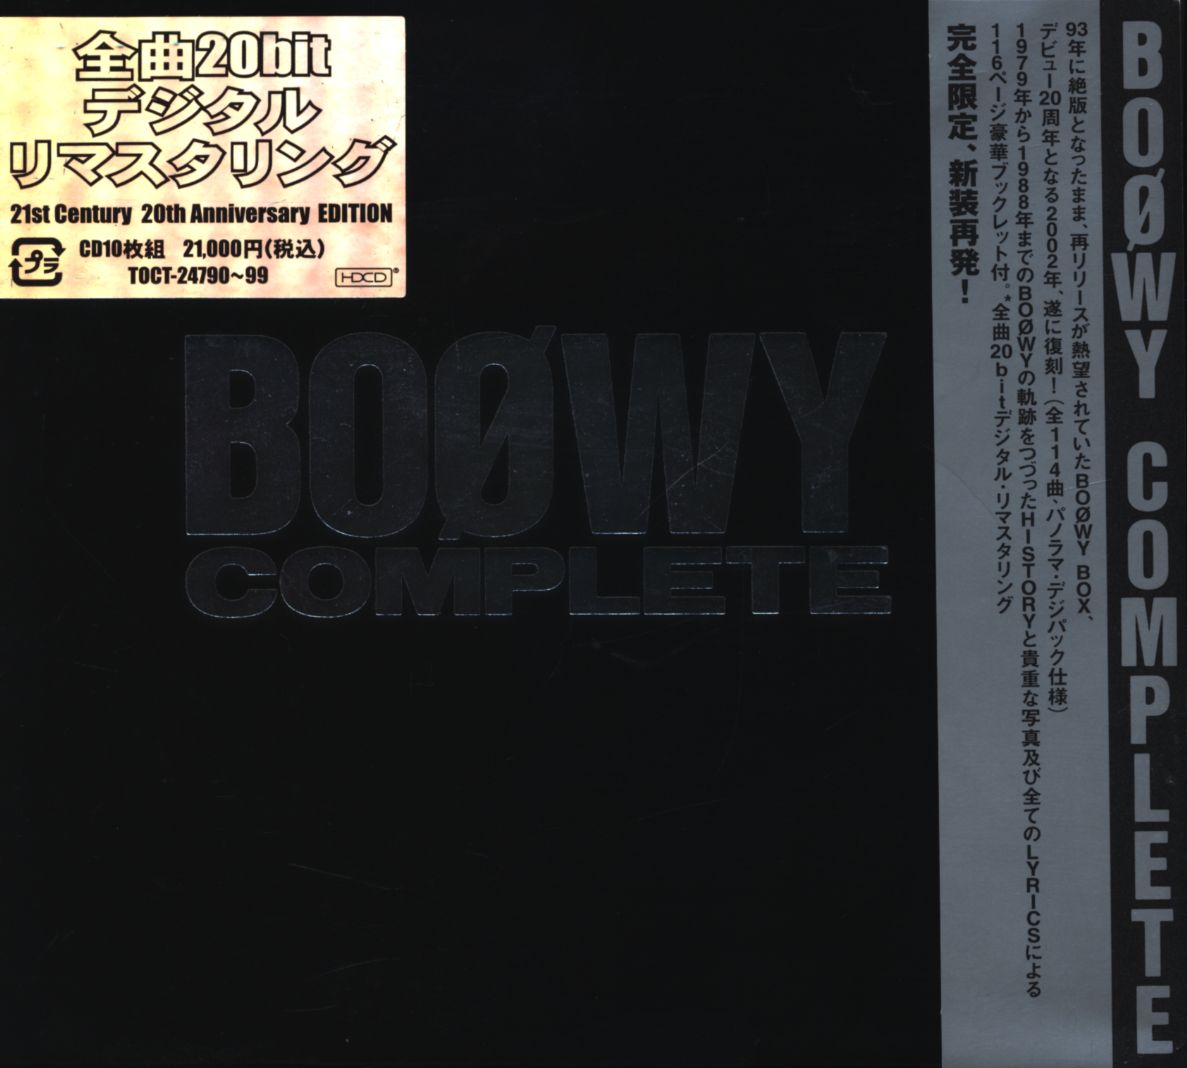 CD BOOWY BOOWY COMPLETE 21st CENTURY 20th ANNIVERSARY EDITION 